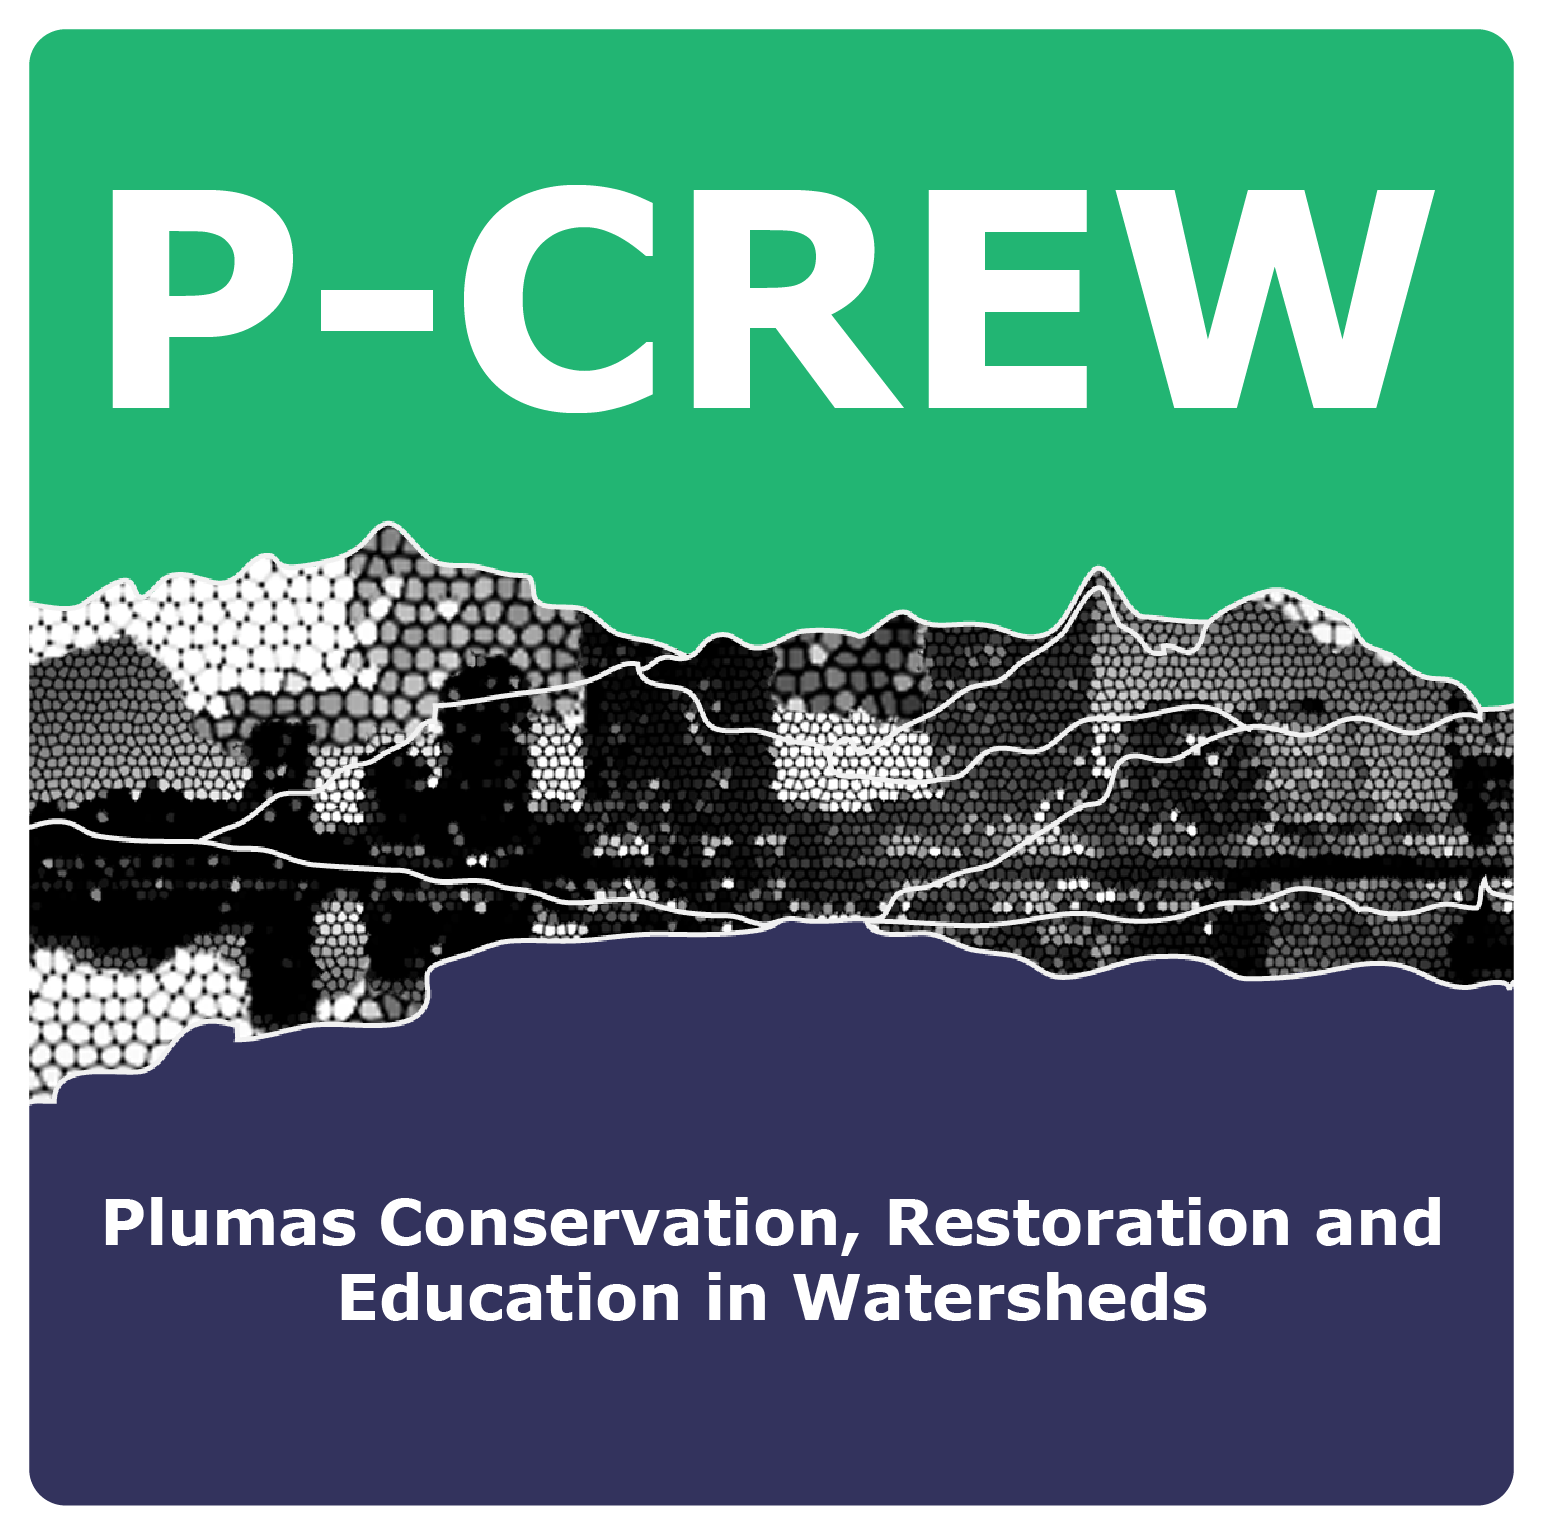 P-CREW Assistant Youth Coordinator